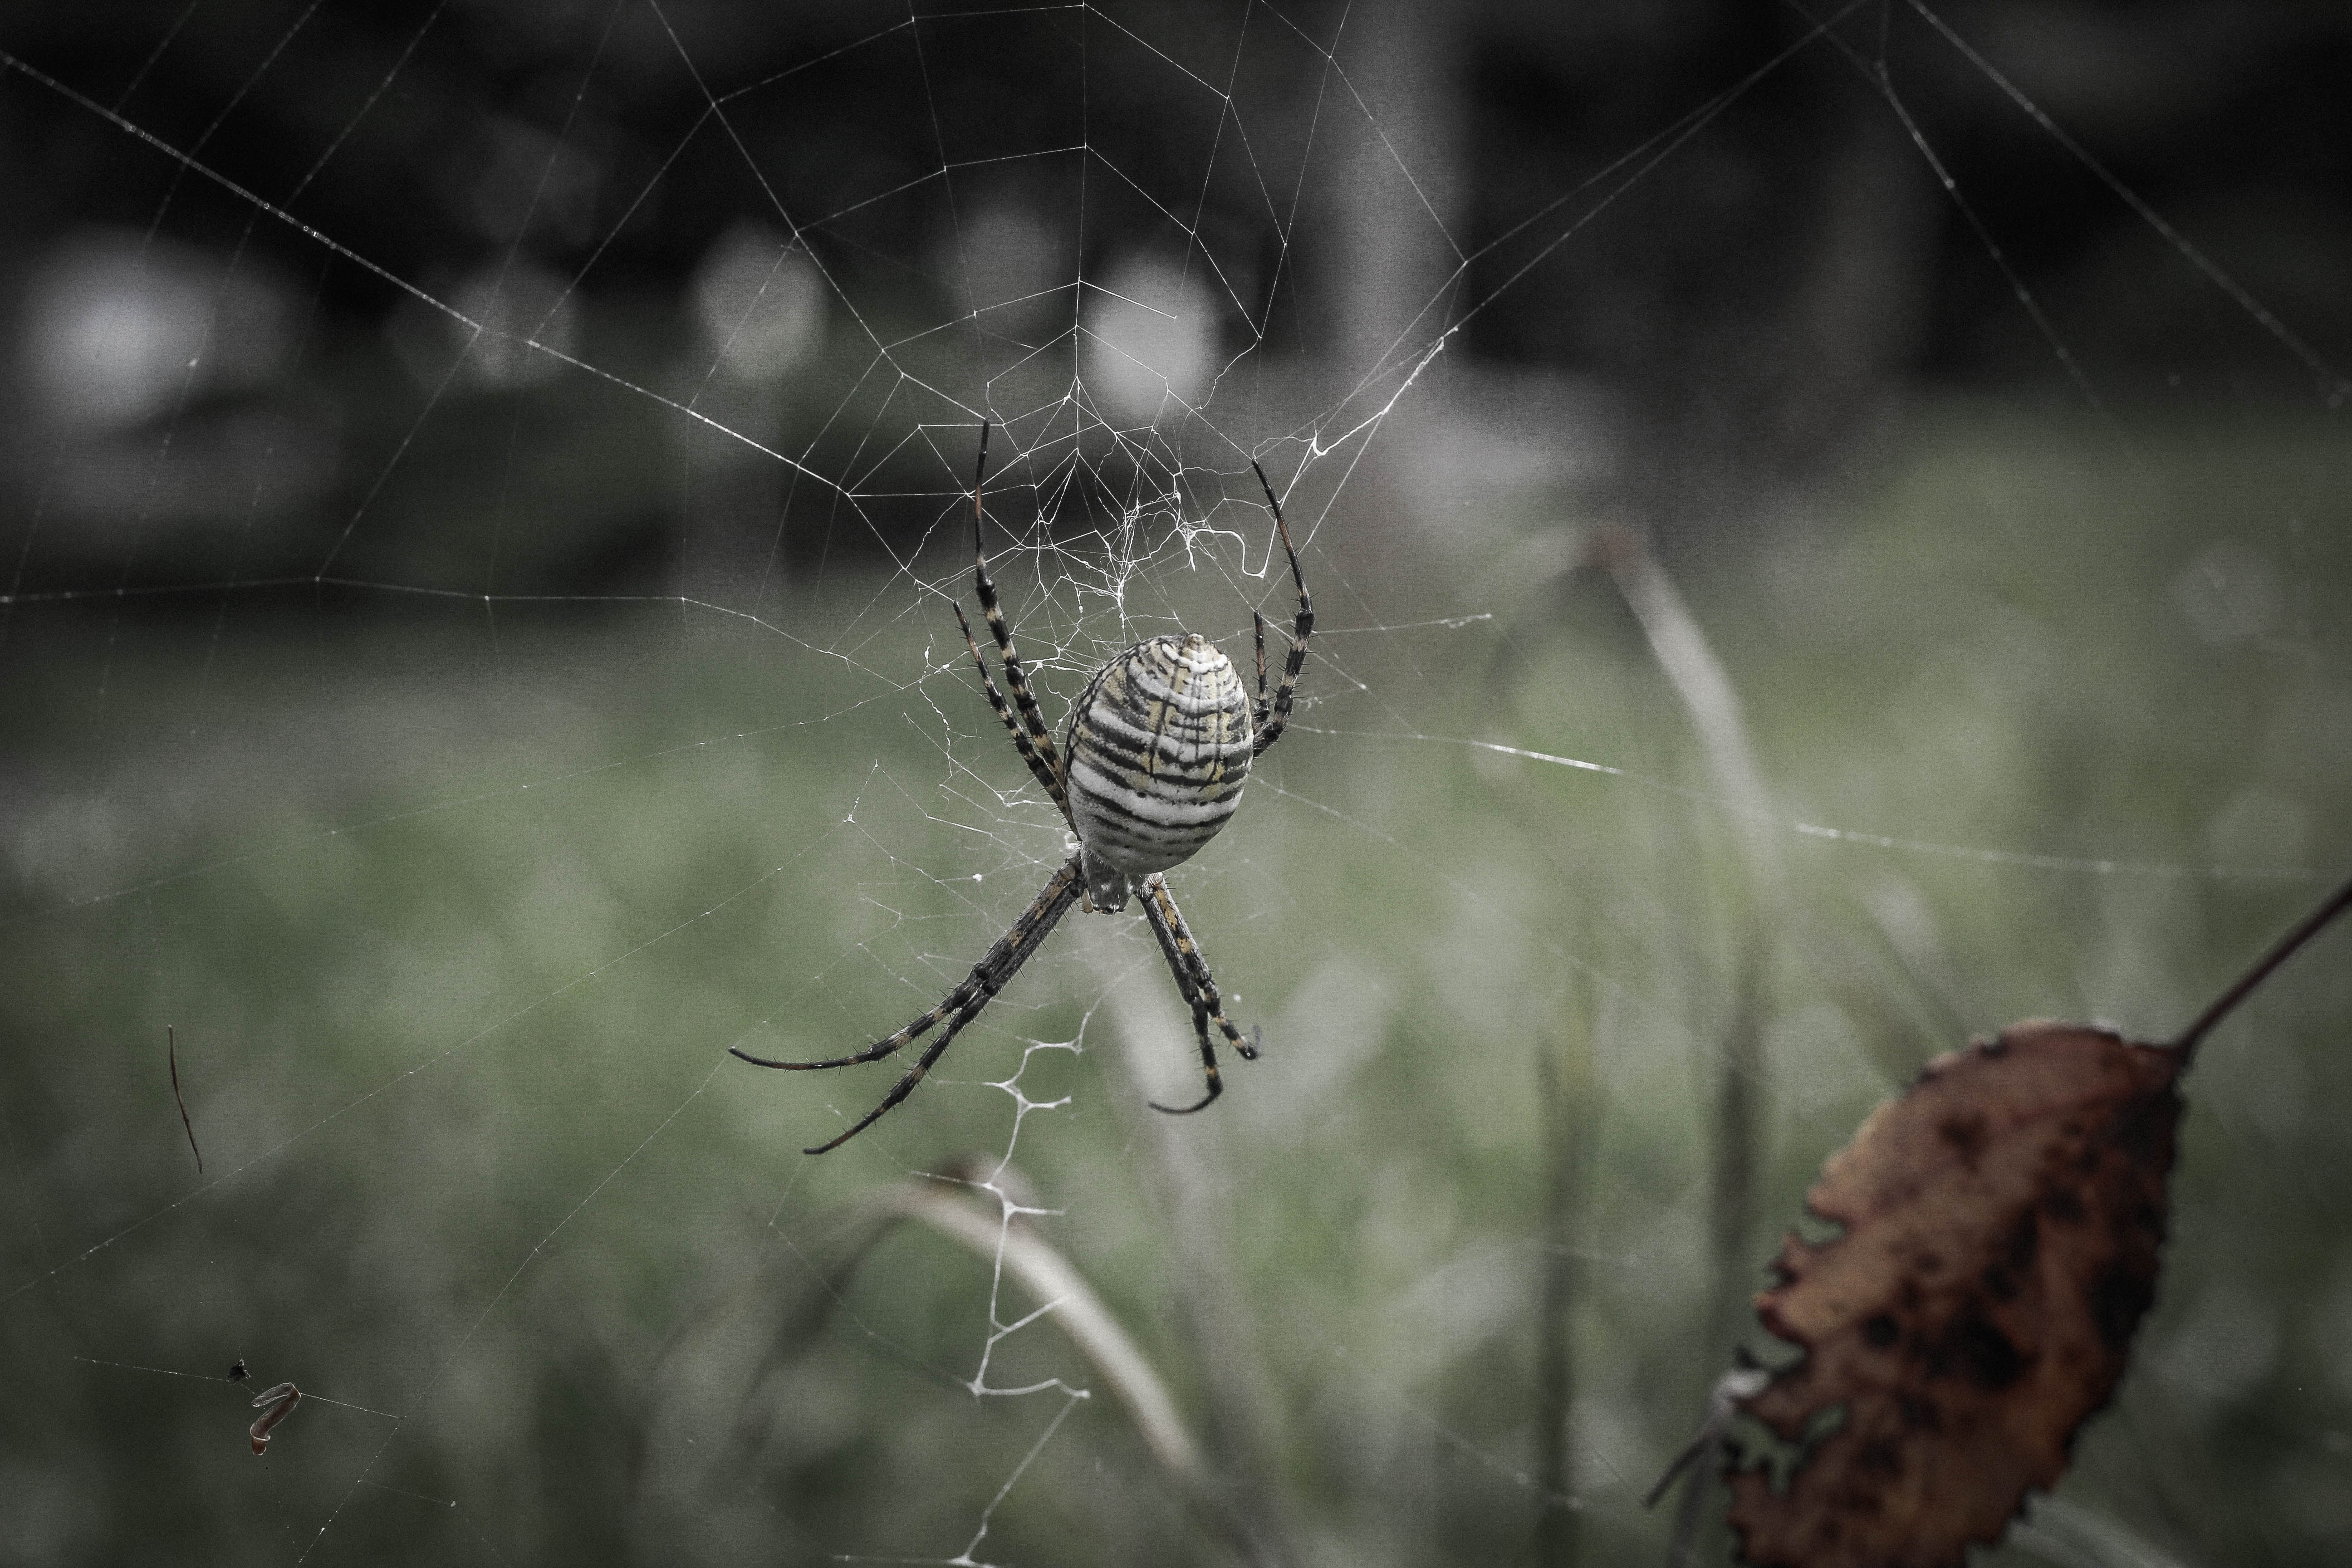 Photo of a garden spider weaving a web. Photo by Miceli Productions